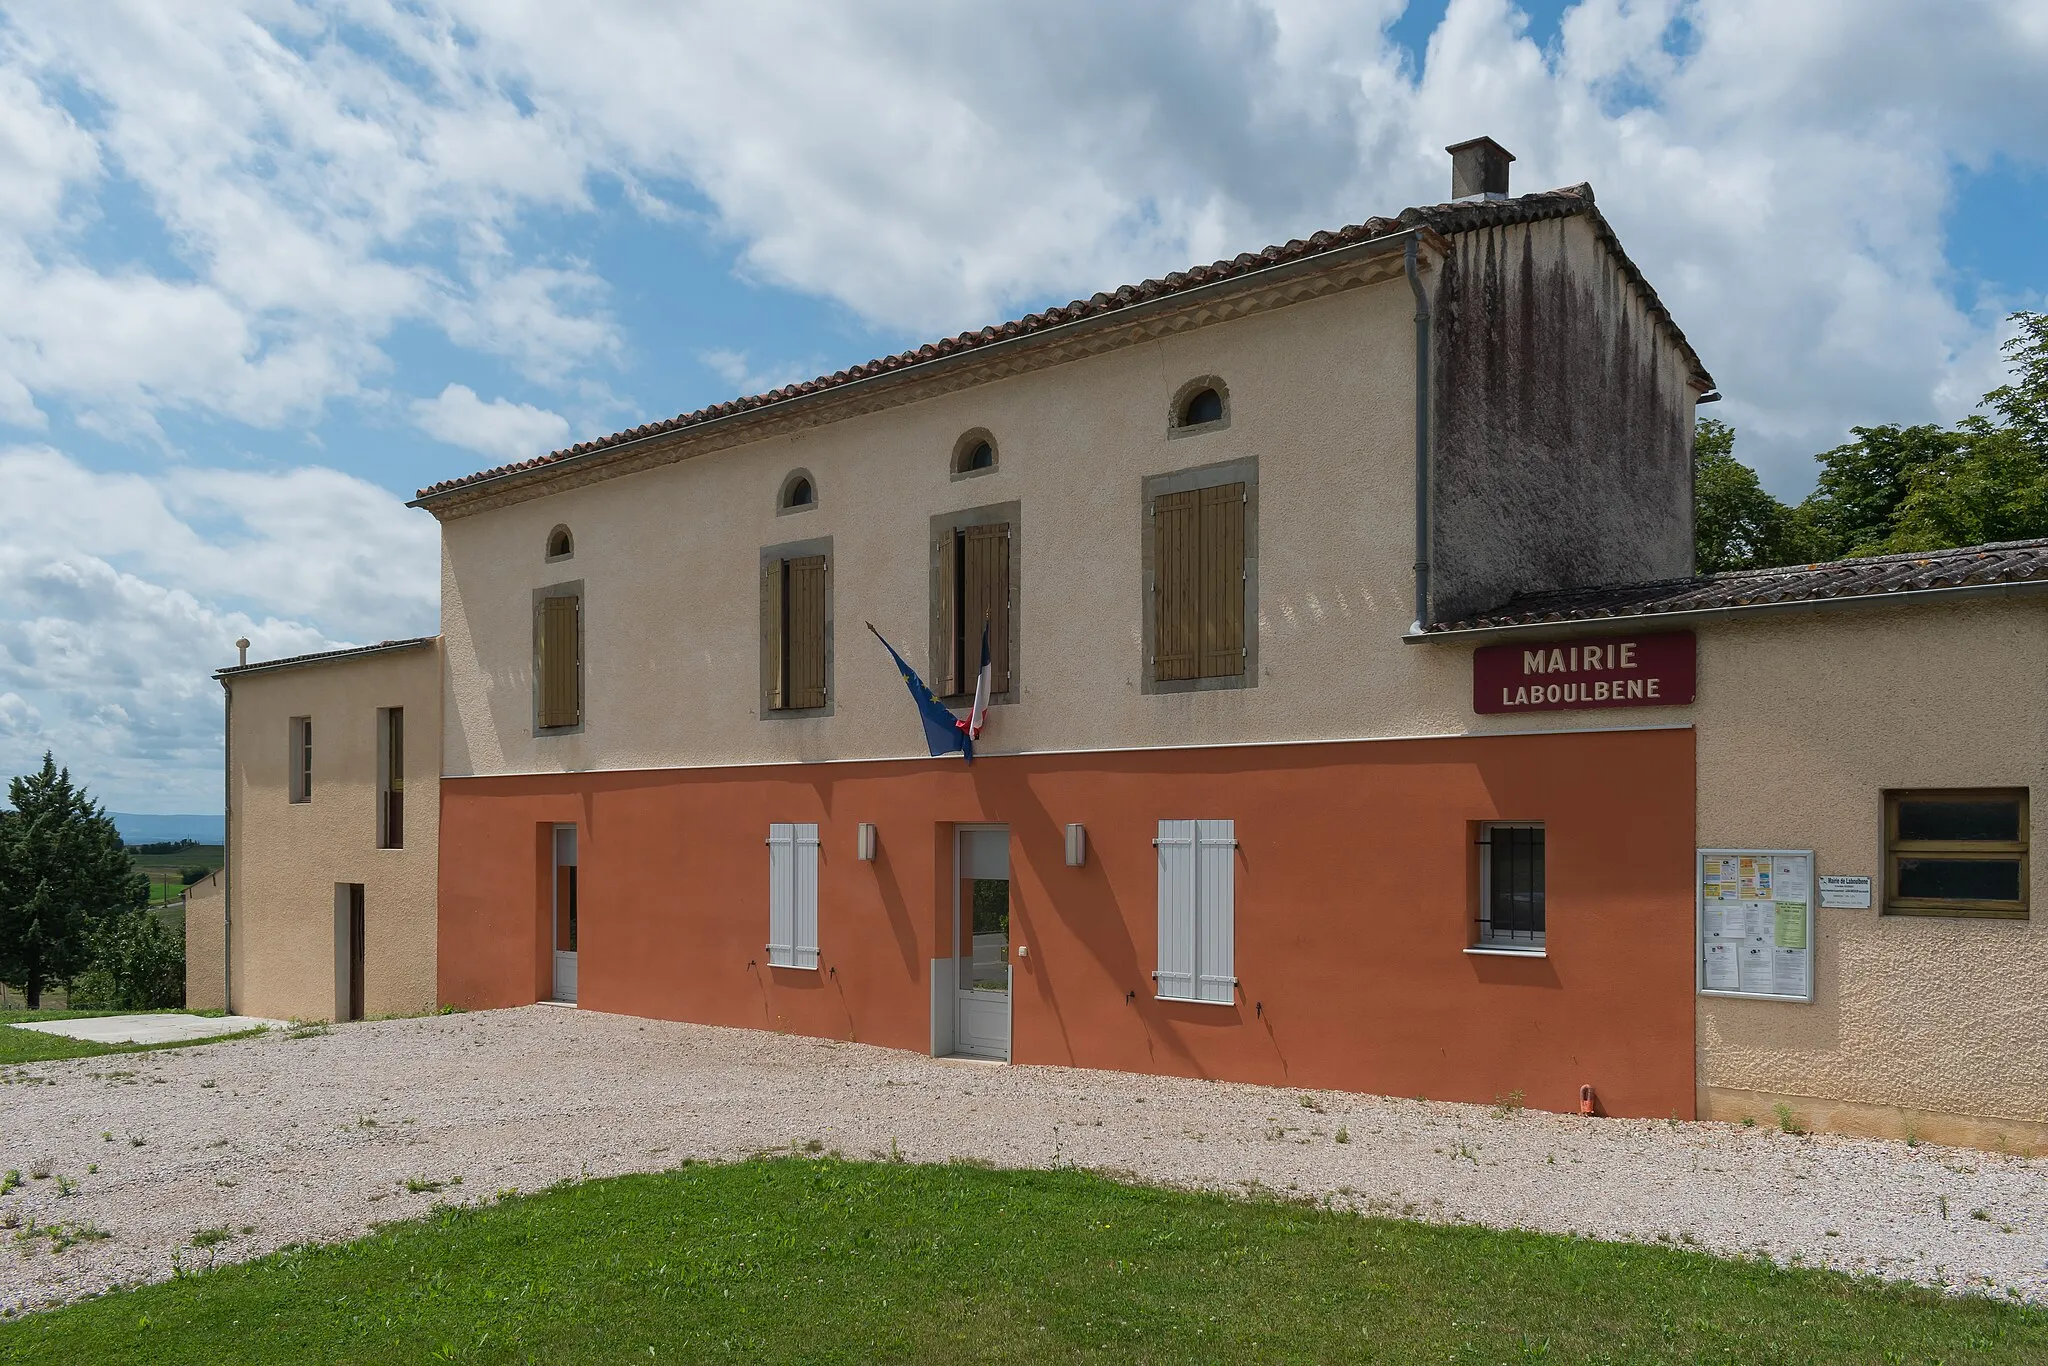 Photo showing: Town hall of Laboulbène, Tarn, France